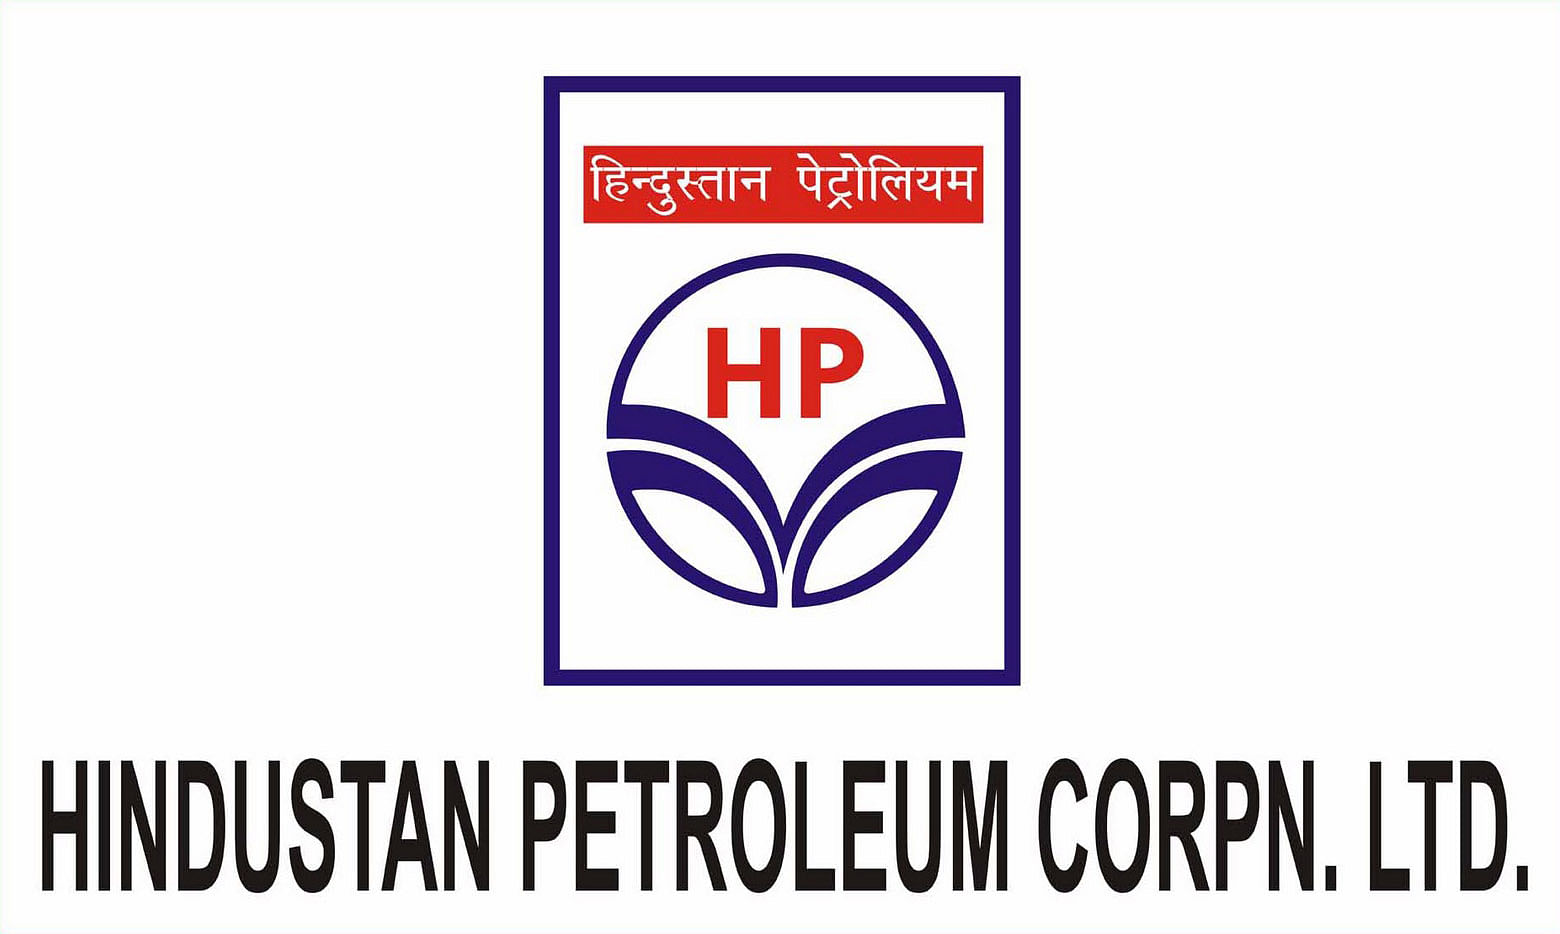 HPCL Engineer Recruitment 2021: Application Process to Conclude Soon for 200 Posts, Detailed Information Here